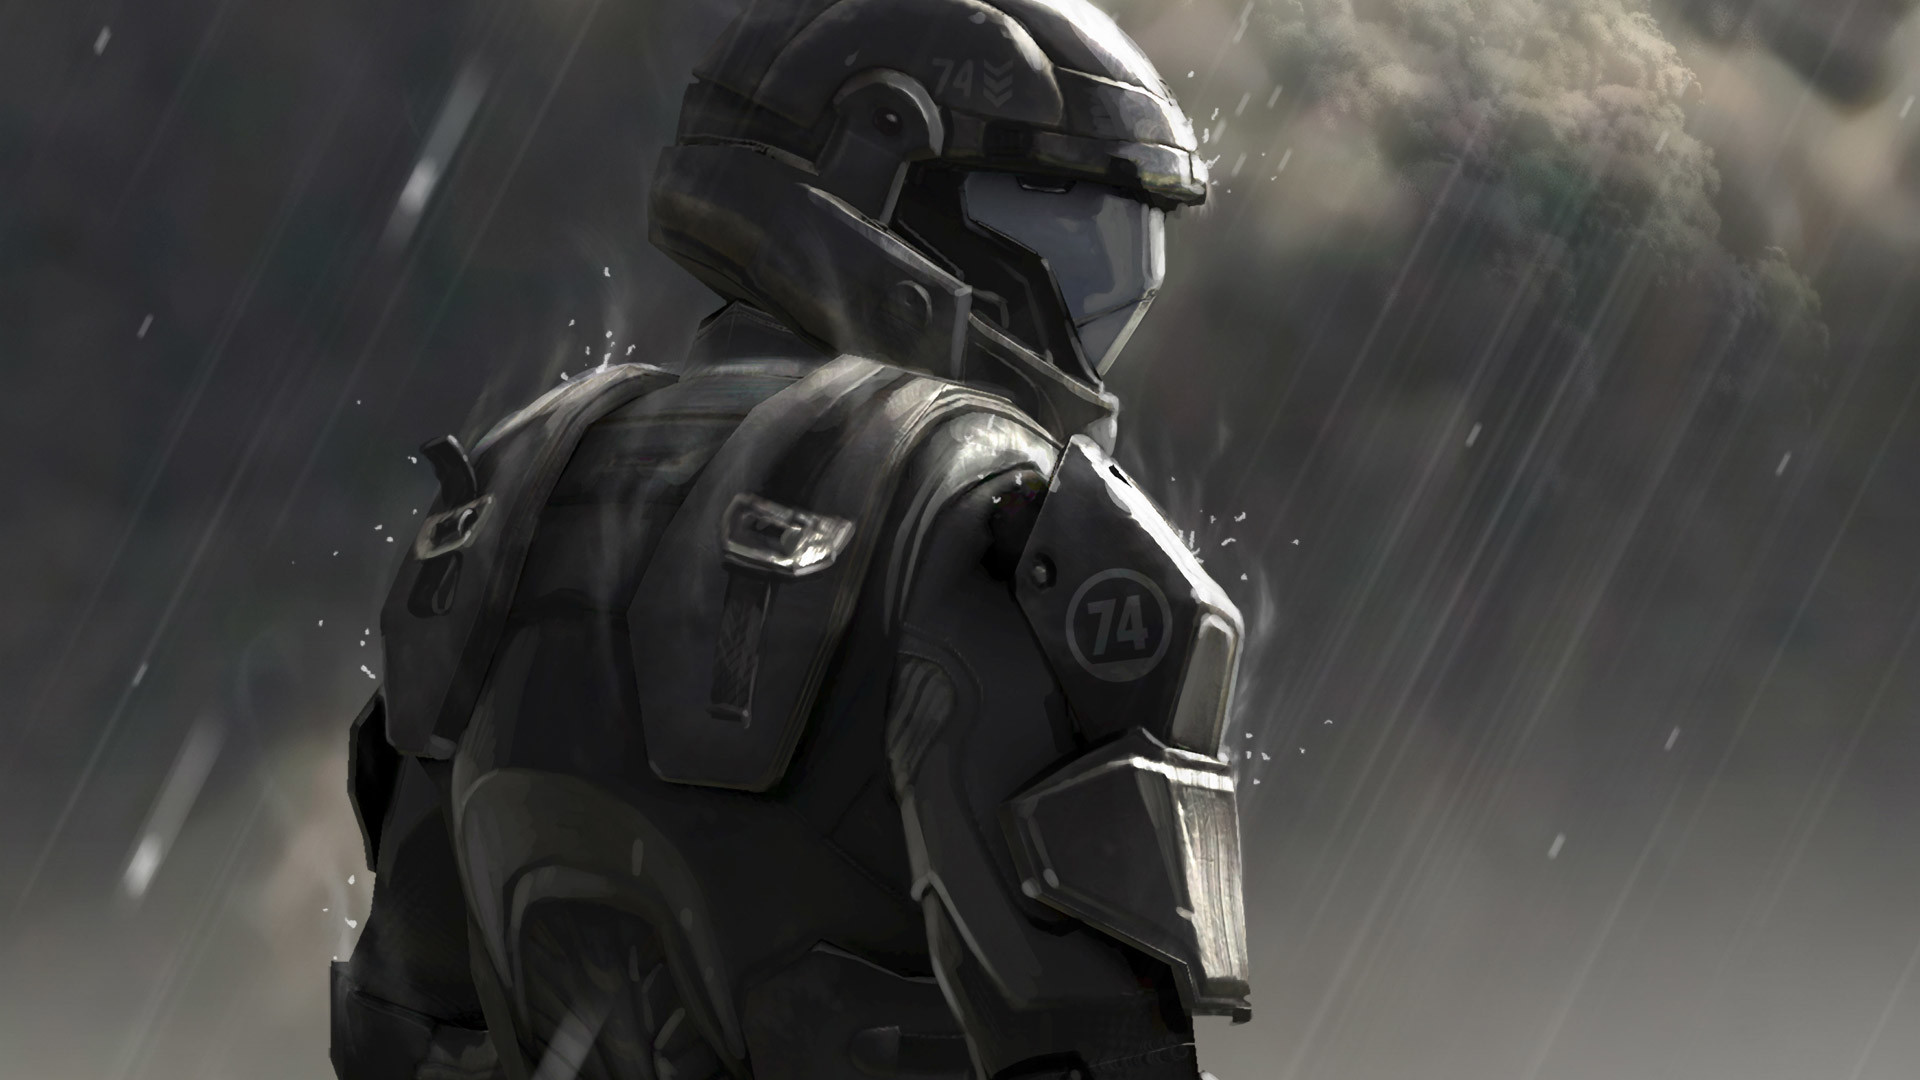 Halo 3 Odst Wallpapers.